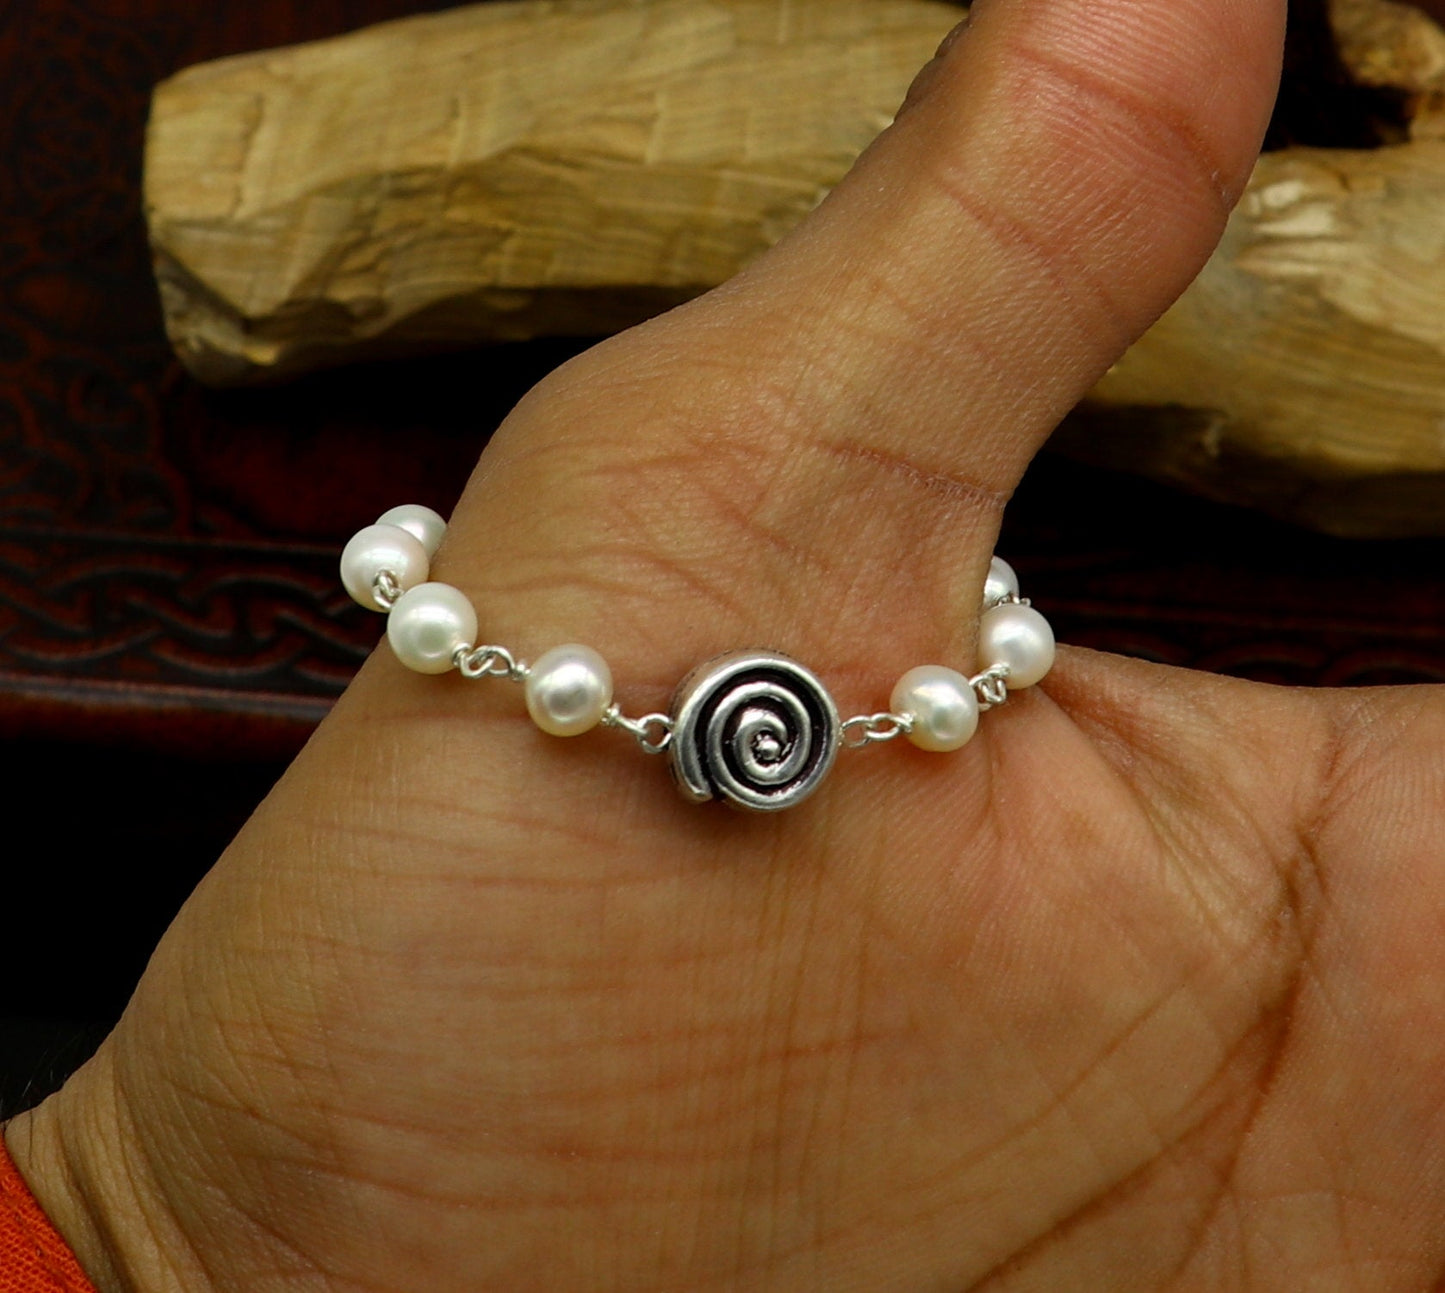 All size 925 sterling silver handmade fabulous natural white pearl beaded baby bracelet, best gift for kids bracelets jewelry bbr01 - TRIBAL ORNAMENTS